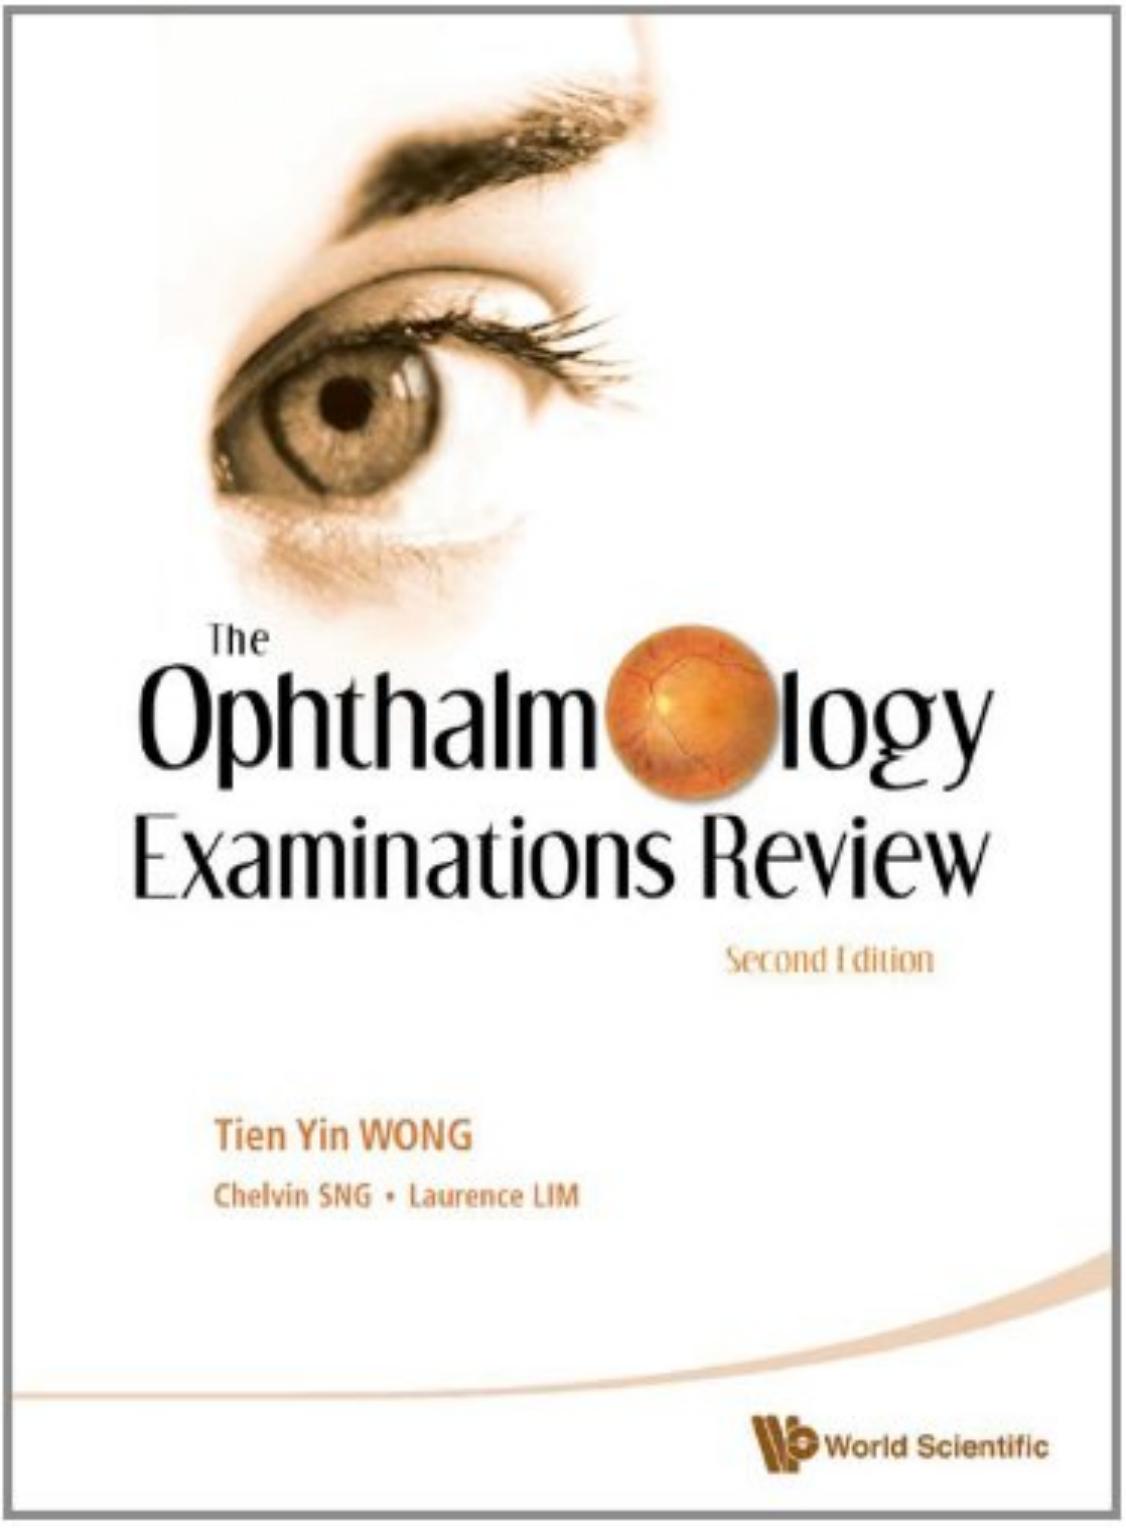 The Ophthalmology Examinations Review, 2e